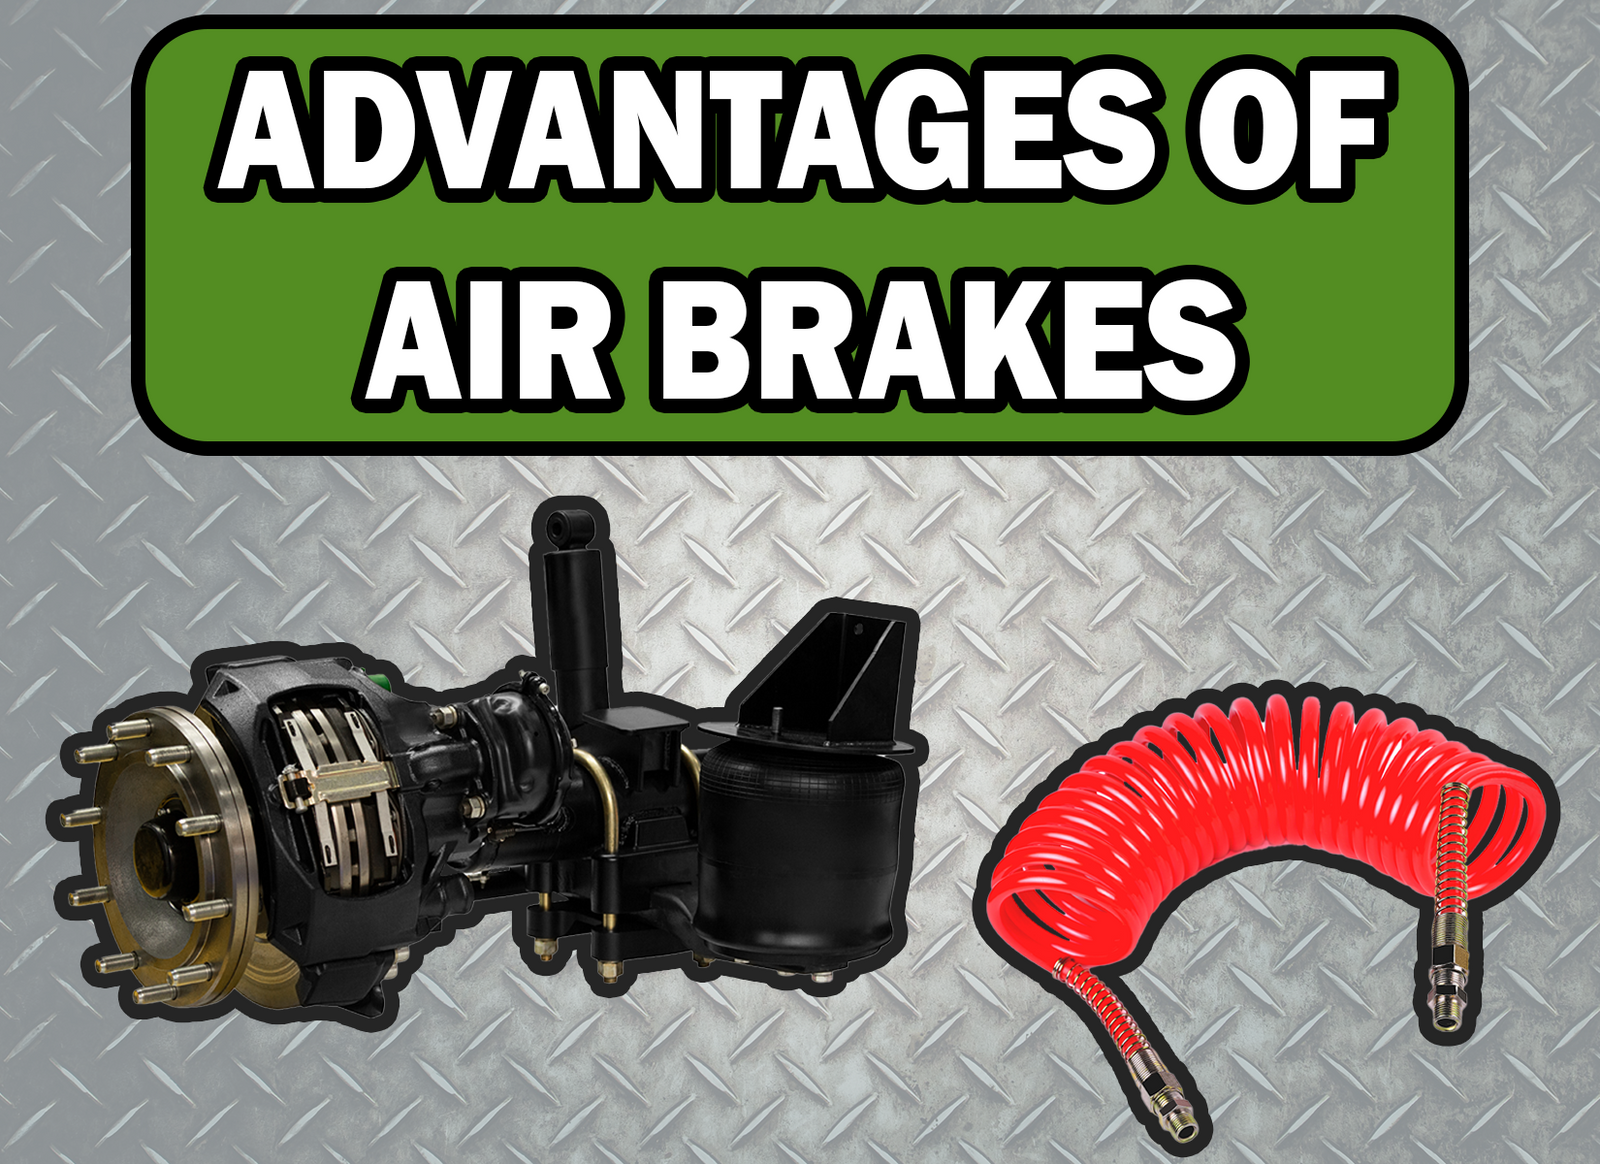 The Advantages of Air Brakes